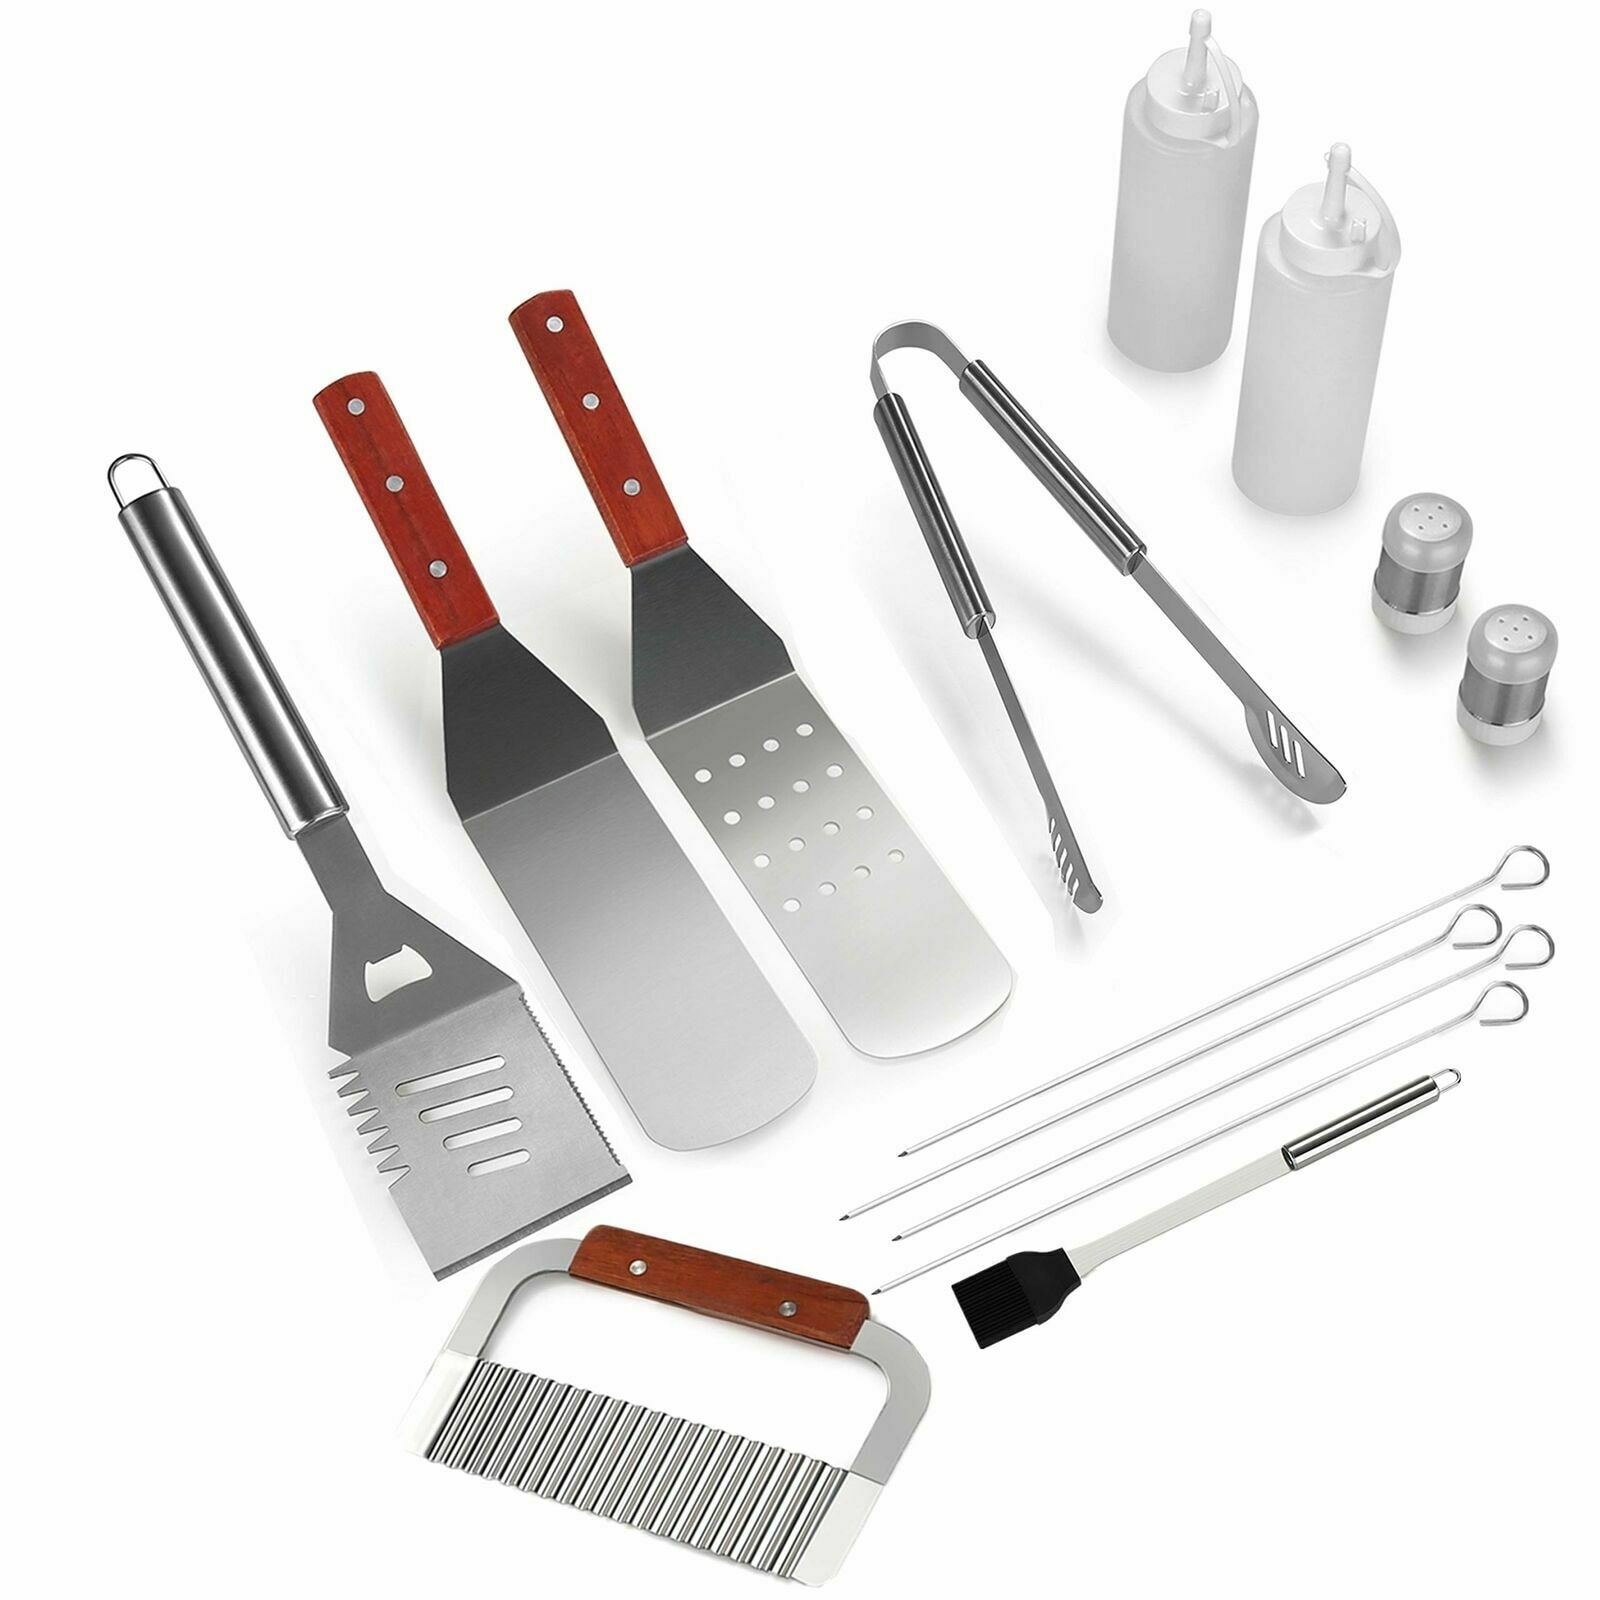 Pit Boss Premium 3 Piece Grill Set (Spatula, Tongs, Cleaning Brush) High  Quality